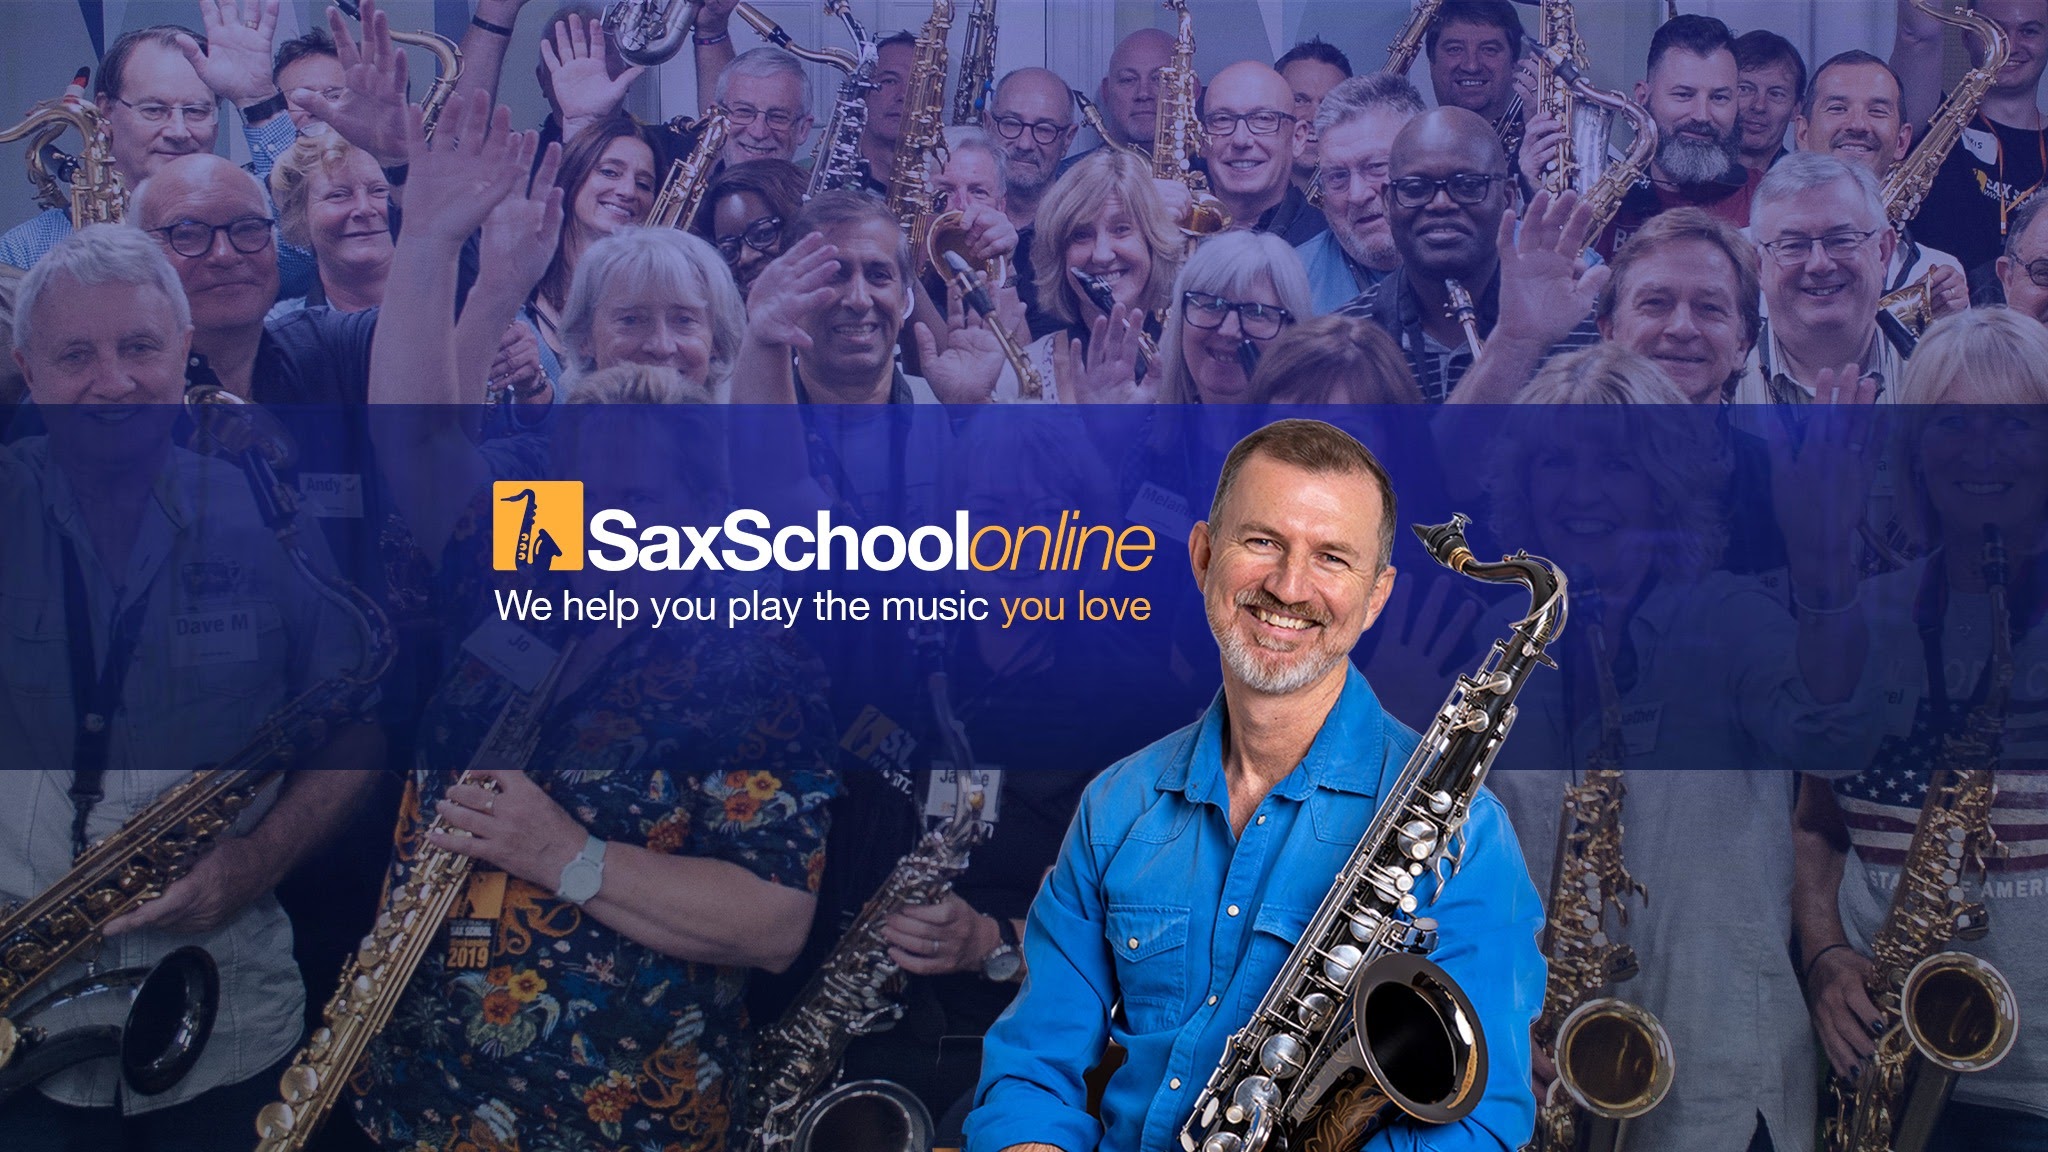 Playing Sax in a Community Band - McGill Music Sax School Online